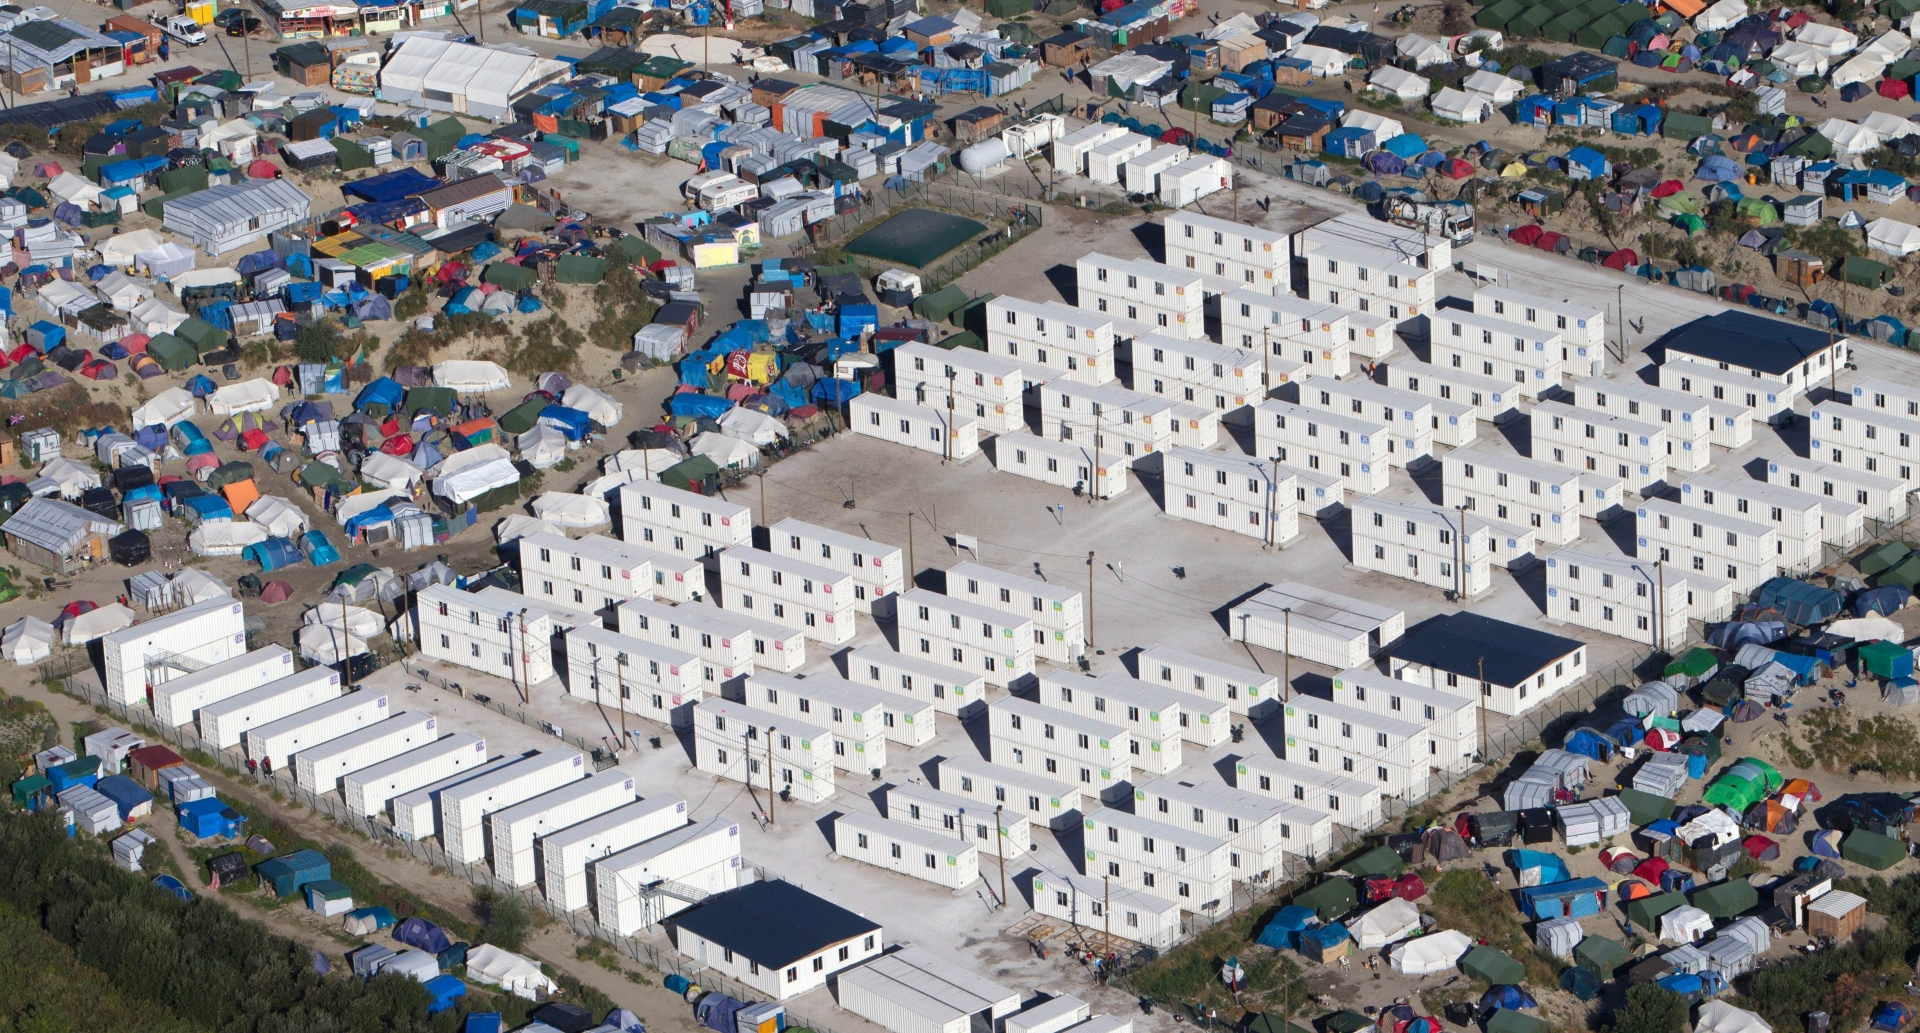 FILE - This Aug. 24, 2016 file photo shows an aerial view of the migrant camp in Calais, northern France. Tempers are rising among migrants squeezed in record numbers into a shrinking slum camp in France's port city of Calais, where hours-long waiting lines for food and showers and the tightening grip of security forces are leaving emotions raw. (AP Photo/Michel Spingler, File) France Migrants Tensions